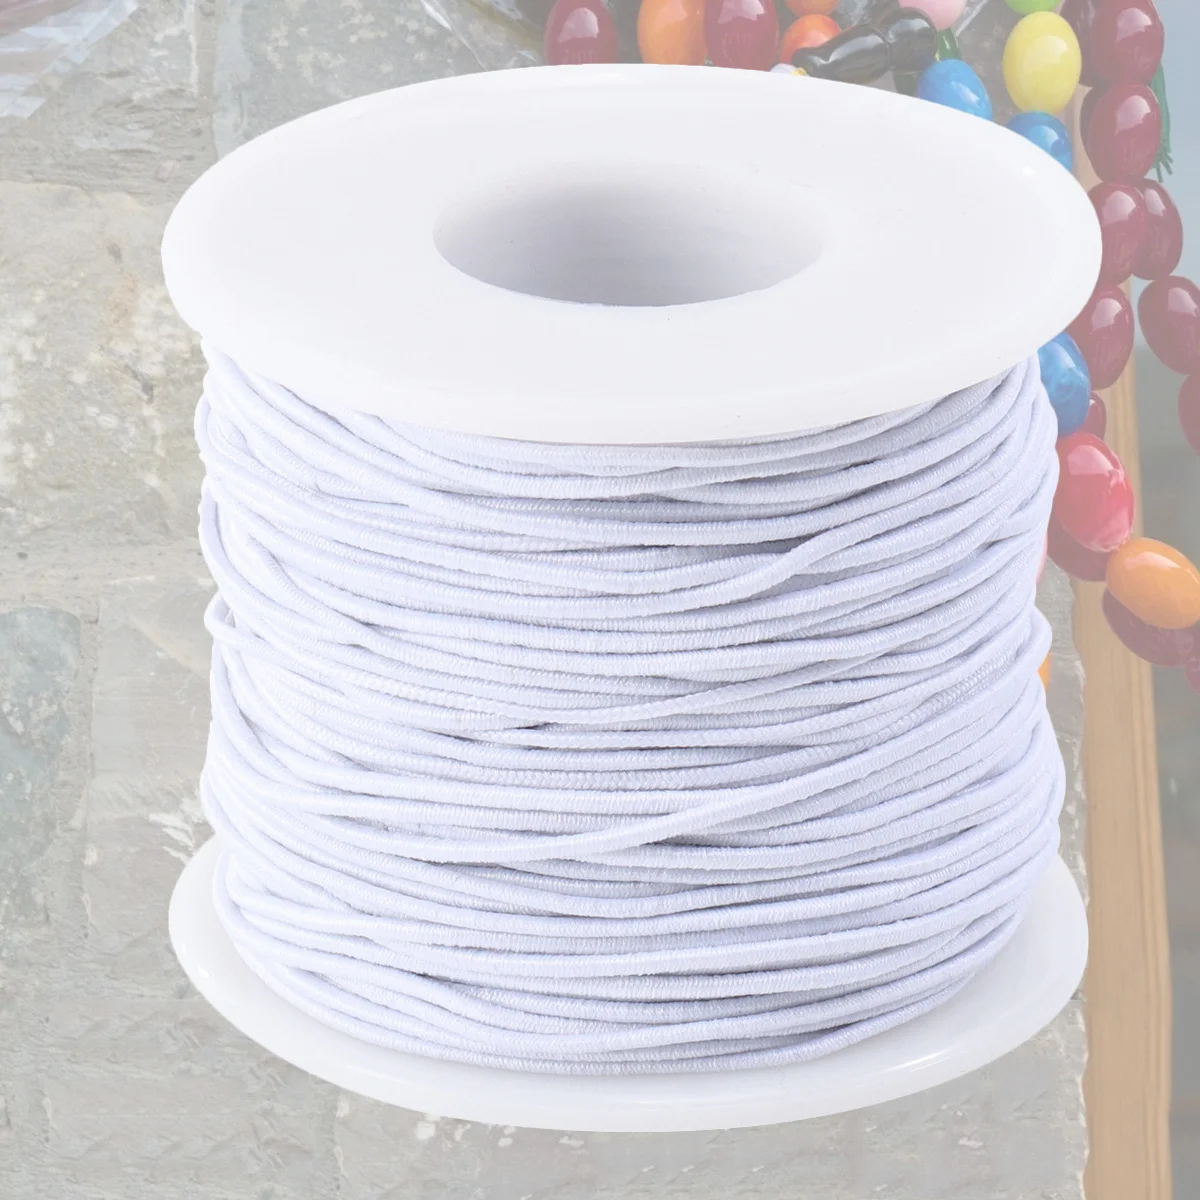 

Elastic Cord String Rope Spool Sewing Stretch Beading Stretchy Bands Braceletthread Roll Cords Knit Tie Earloop Rubber Ear Band